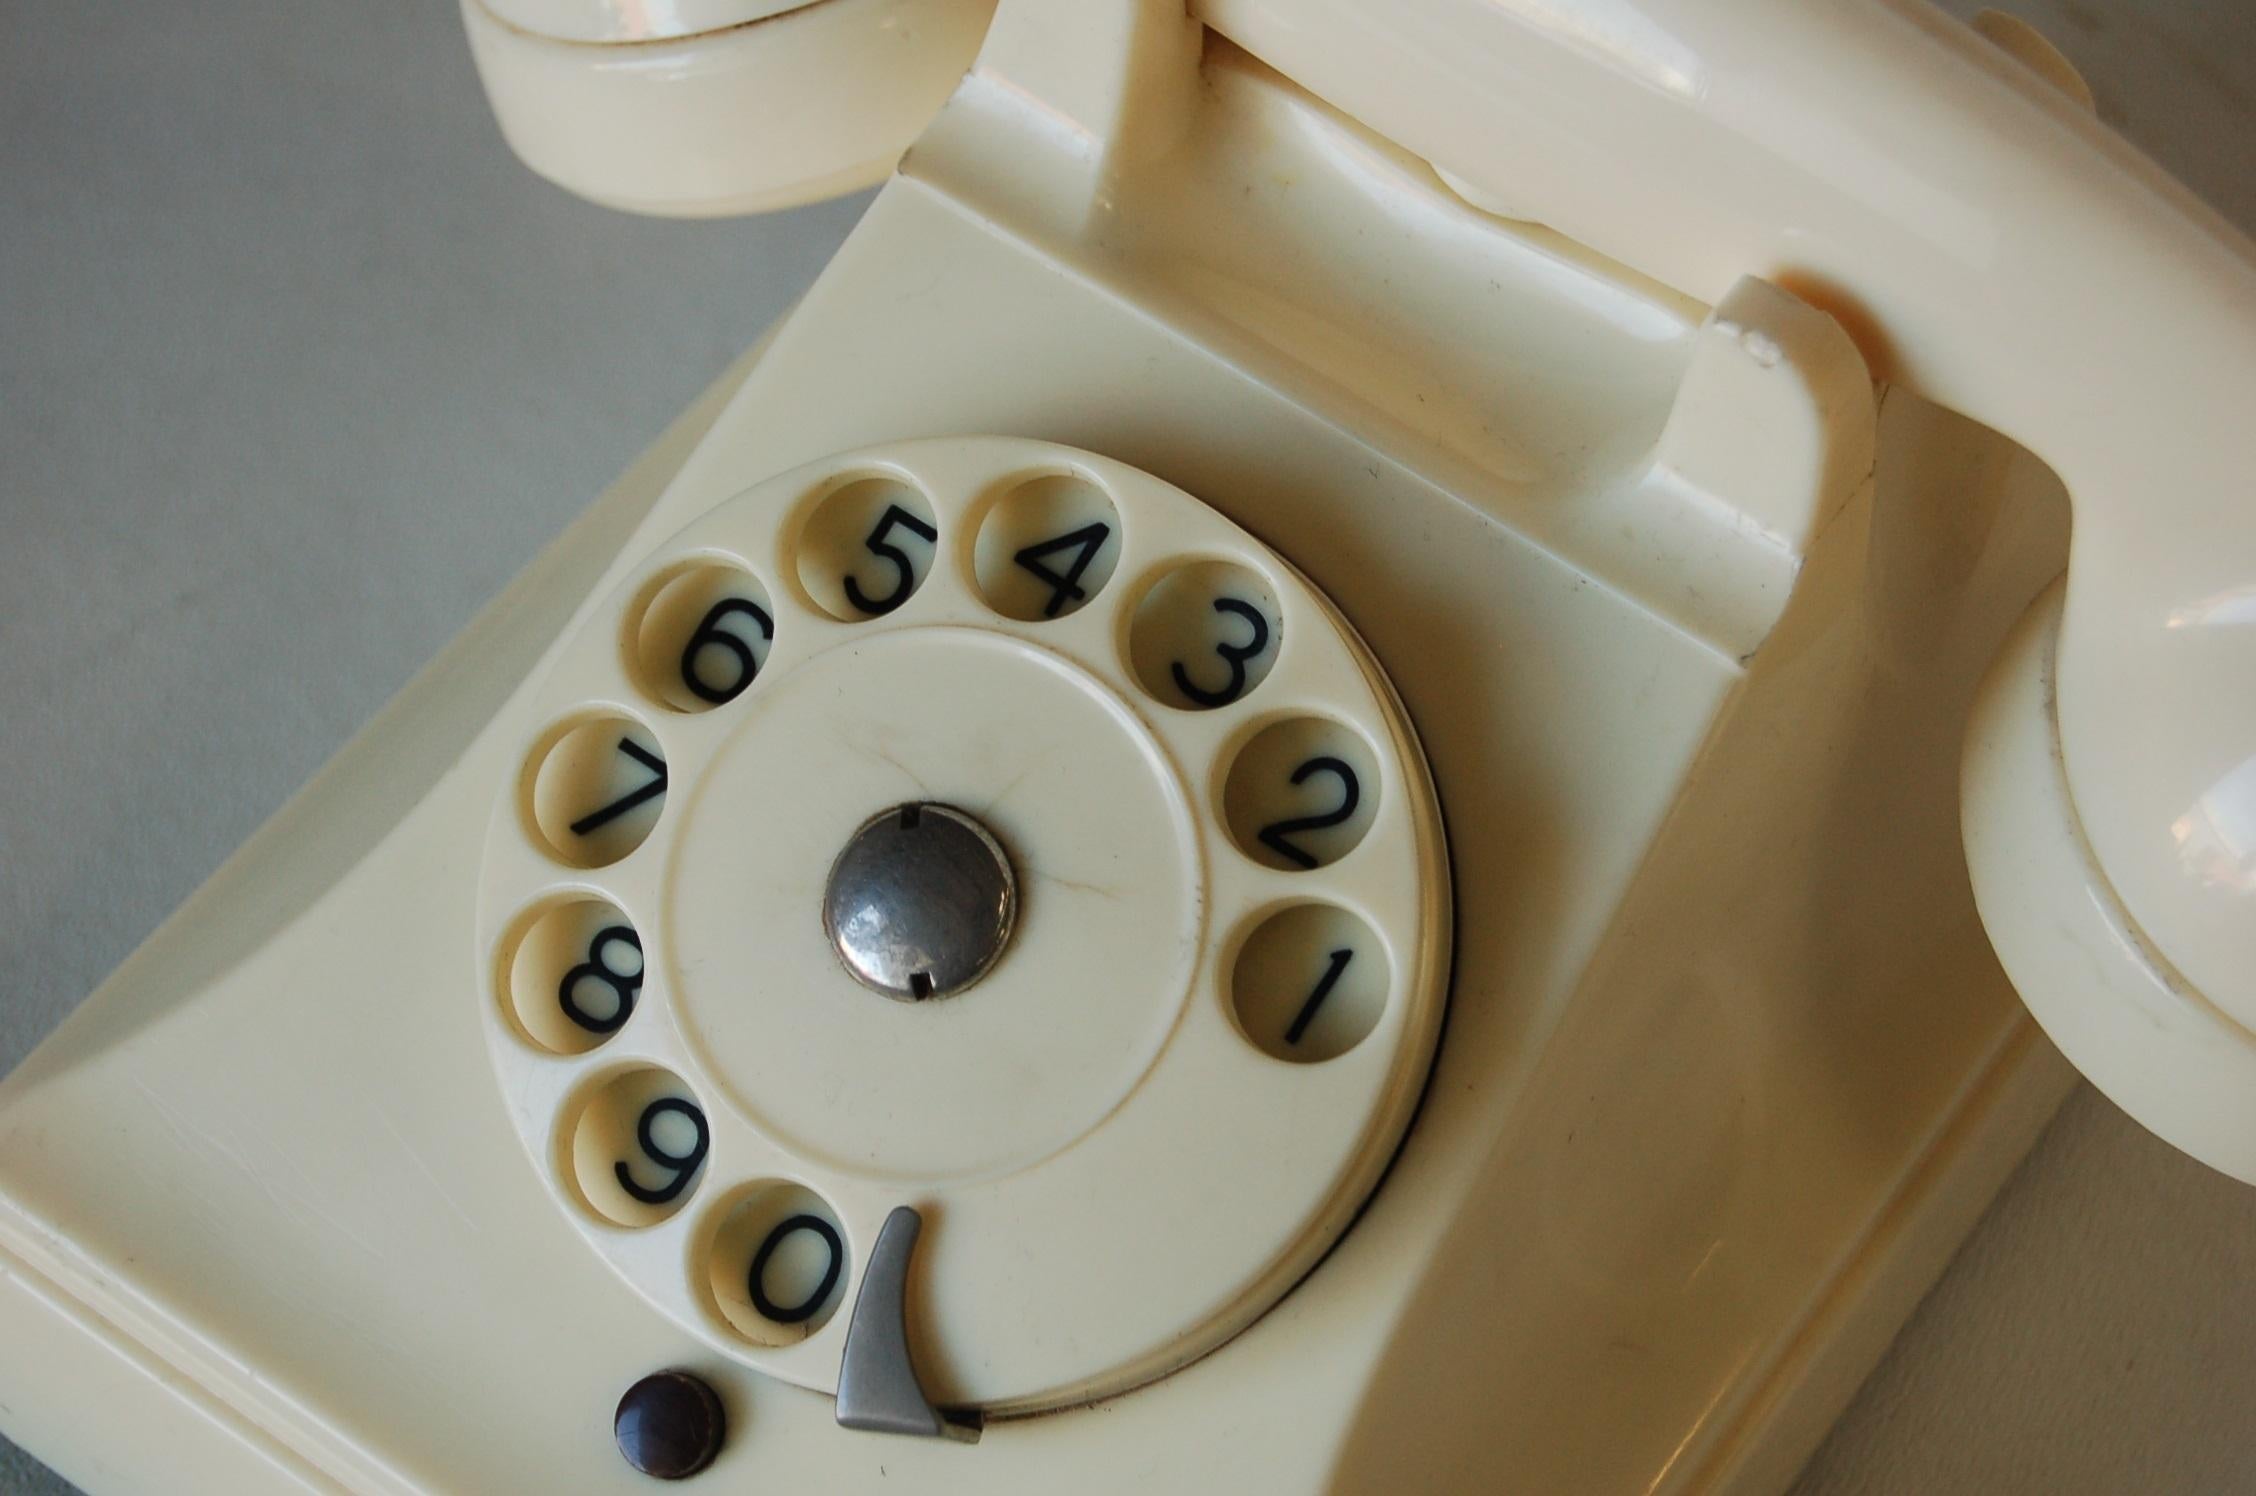 White Bakelite PTT Telephone by Ericsson In Excellent Condition For Sale In Van Nuys, CA